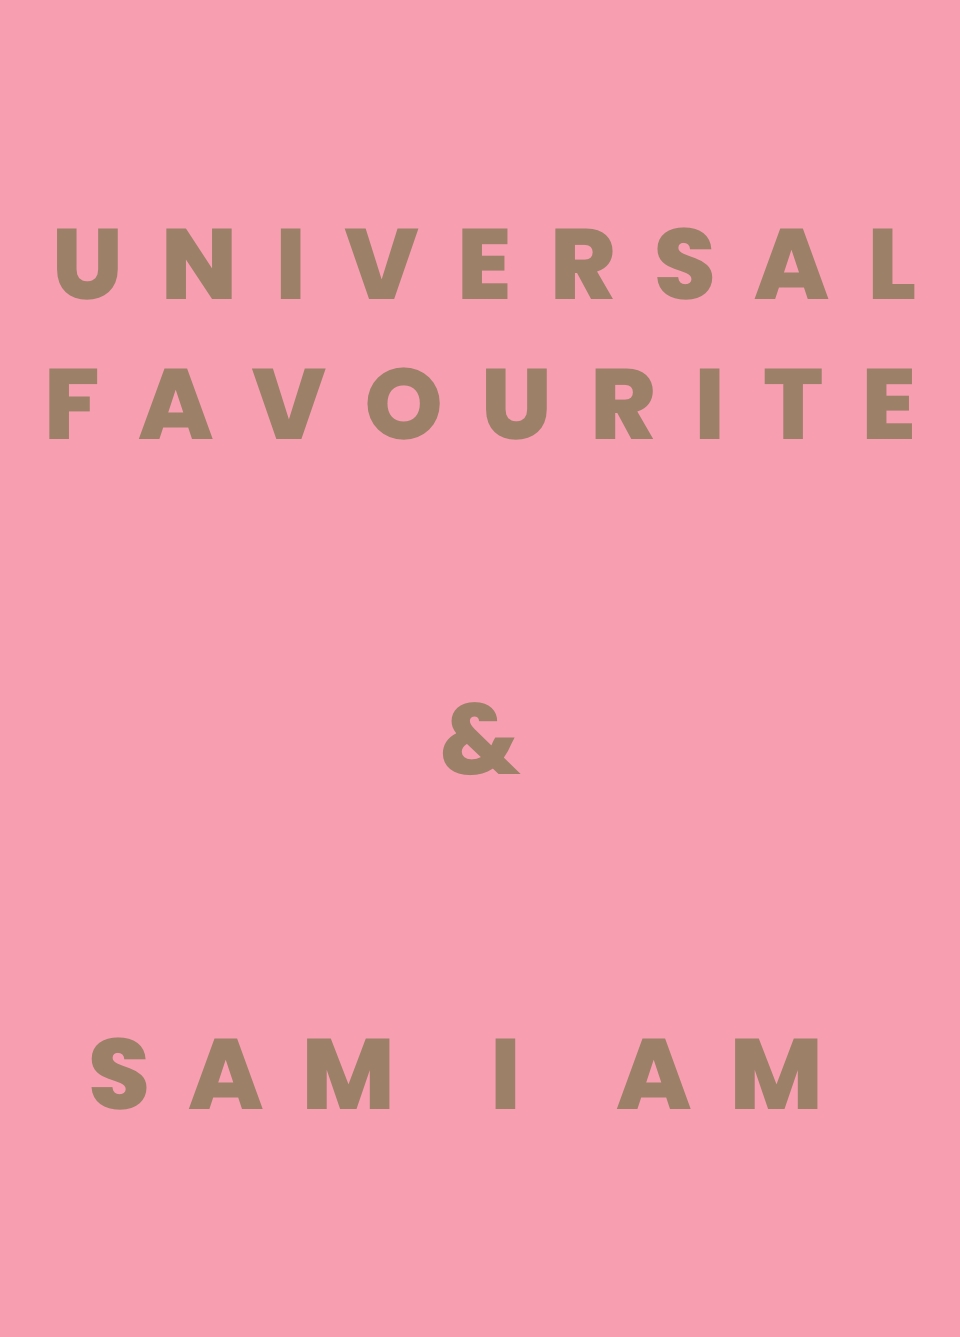 We Consider Sam I Am As Our Creative Partners” - Universal